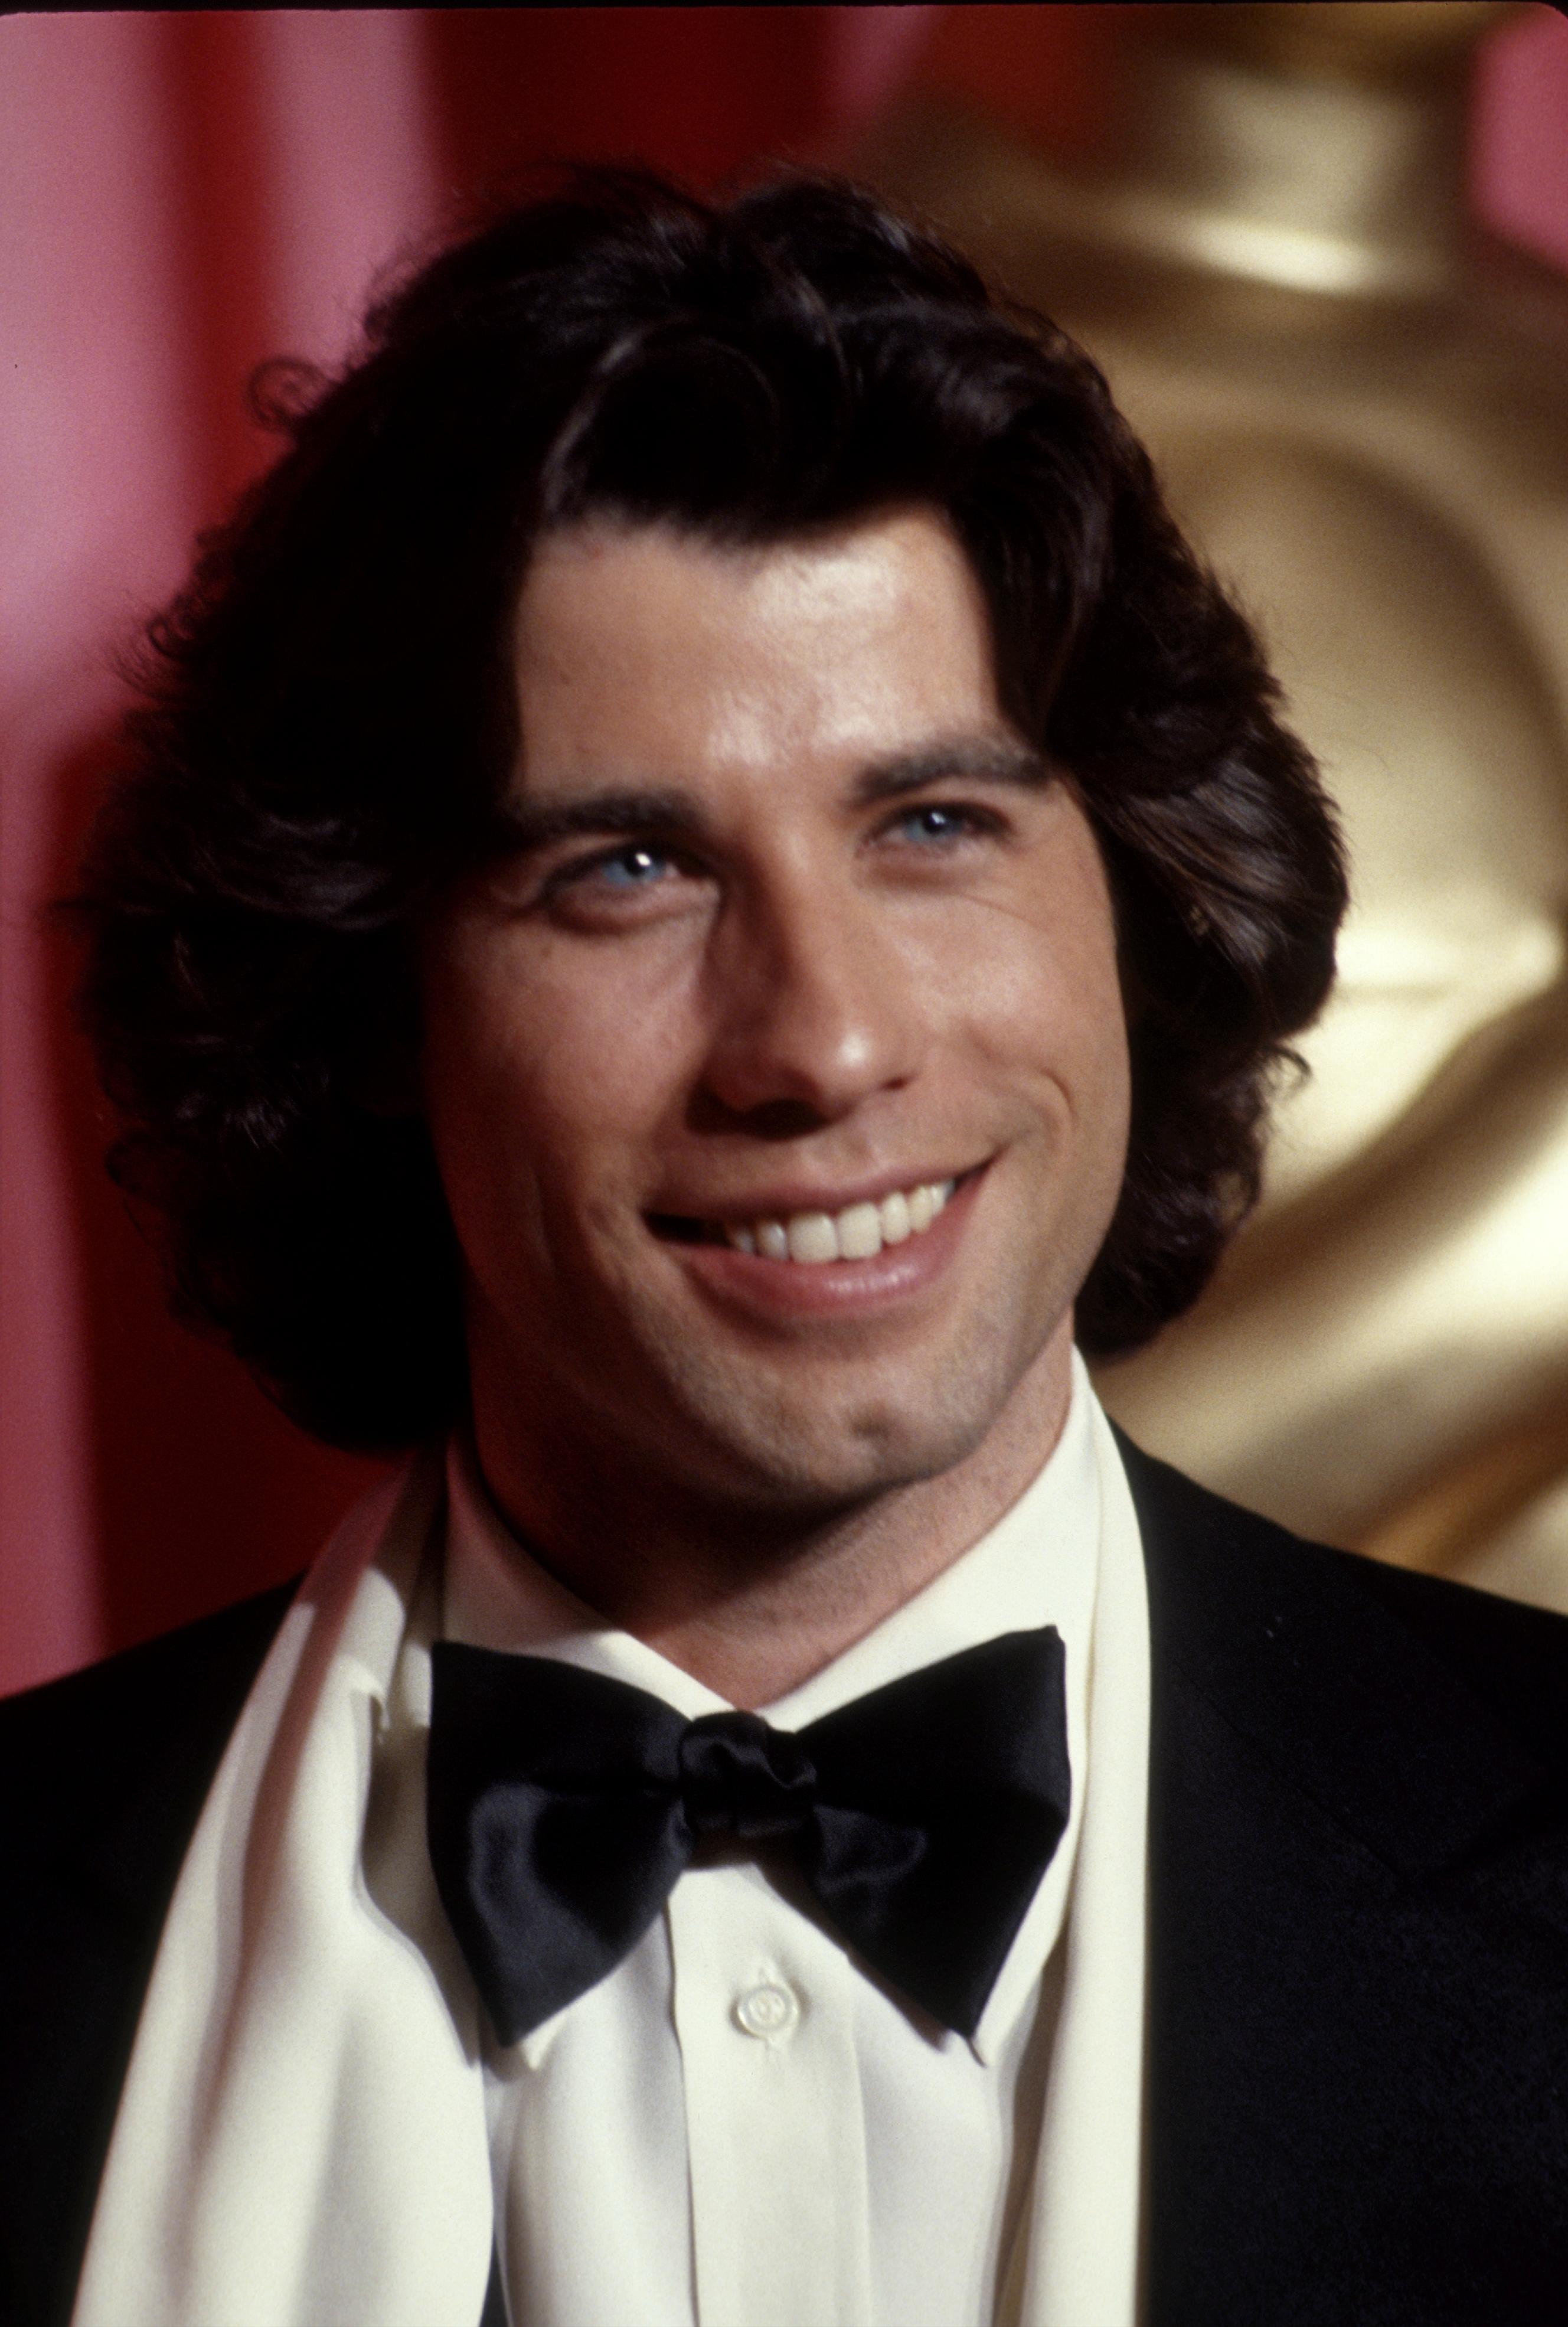 John Travolta at the Academy Awards circa 1978 in Los Angeles. | Source: Getty Images